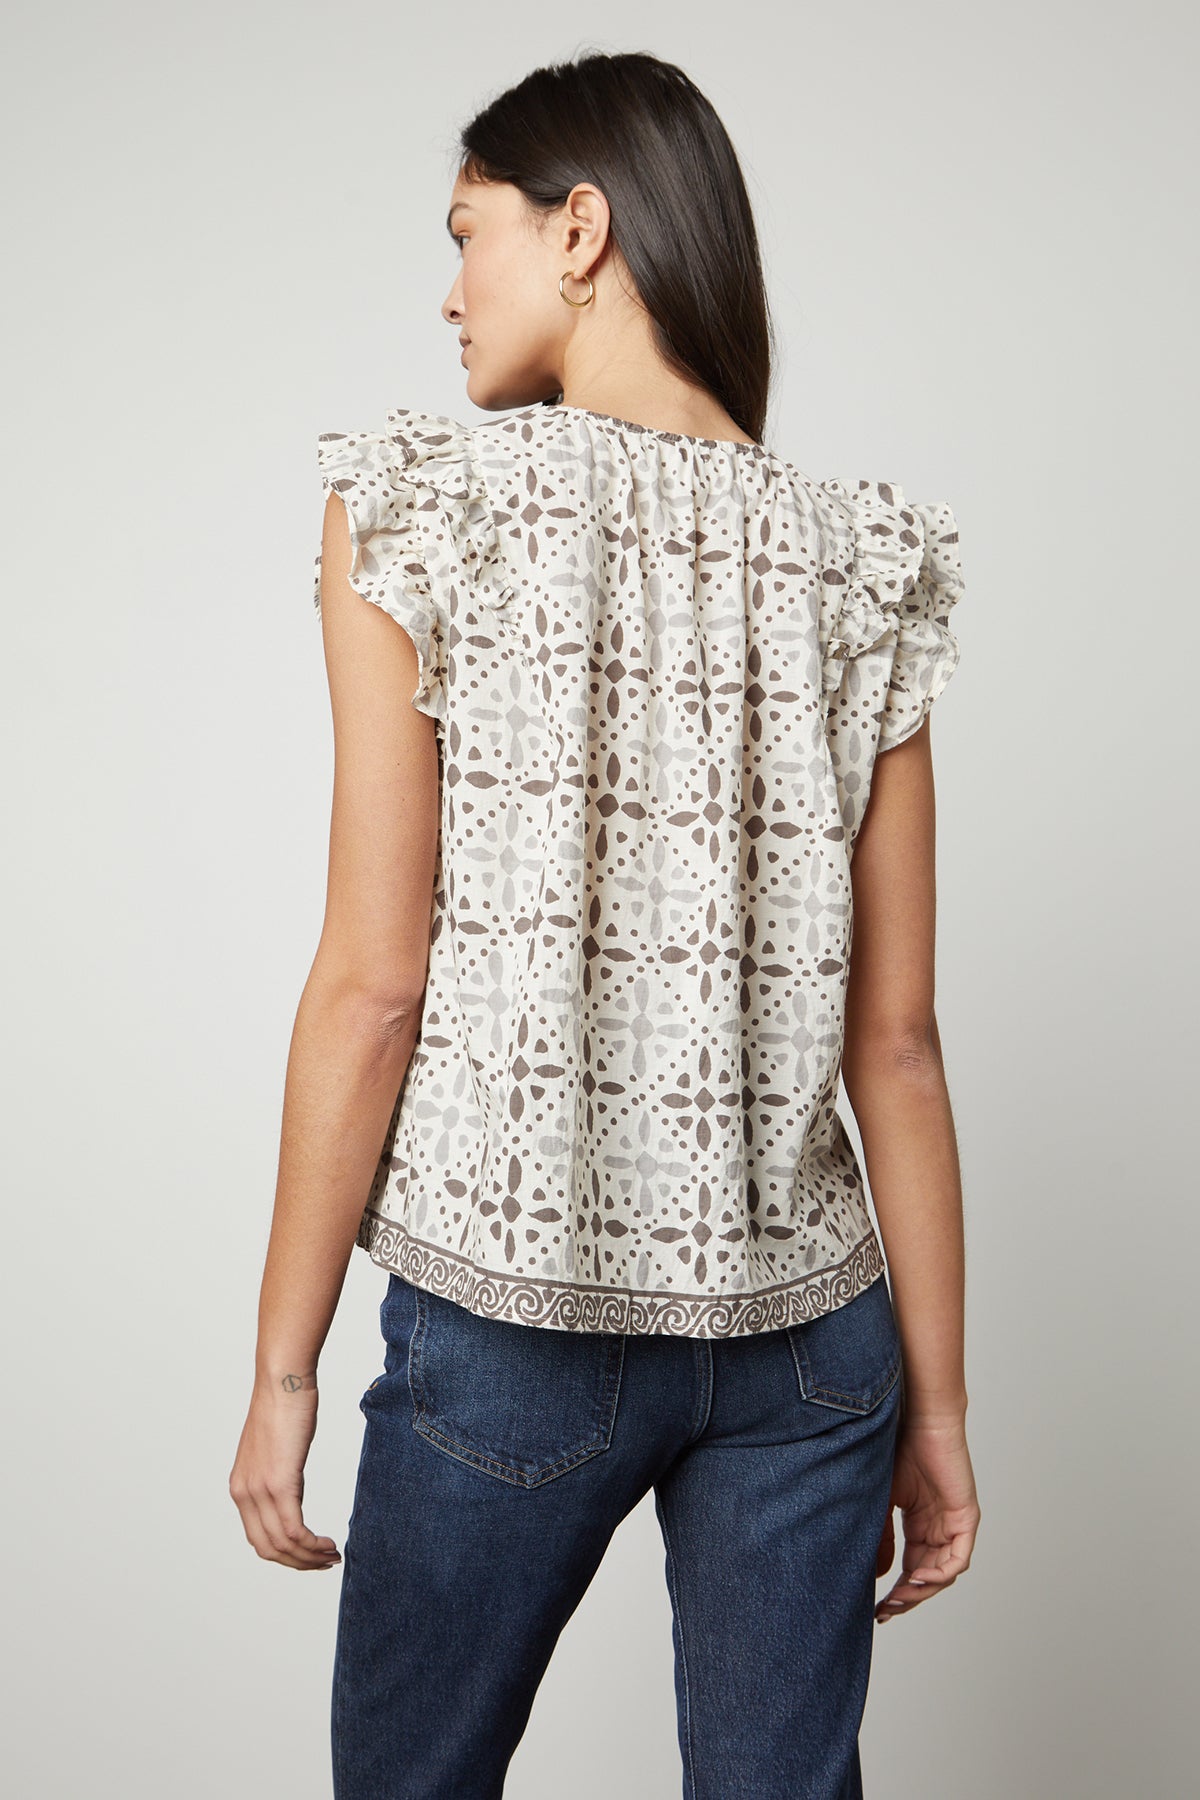   The back view of a woman wearing a CORIN PRINTED TANK TOP by Velvet by Graham & Spencer. 